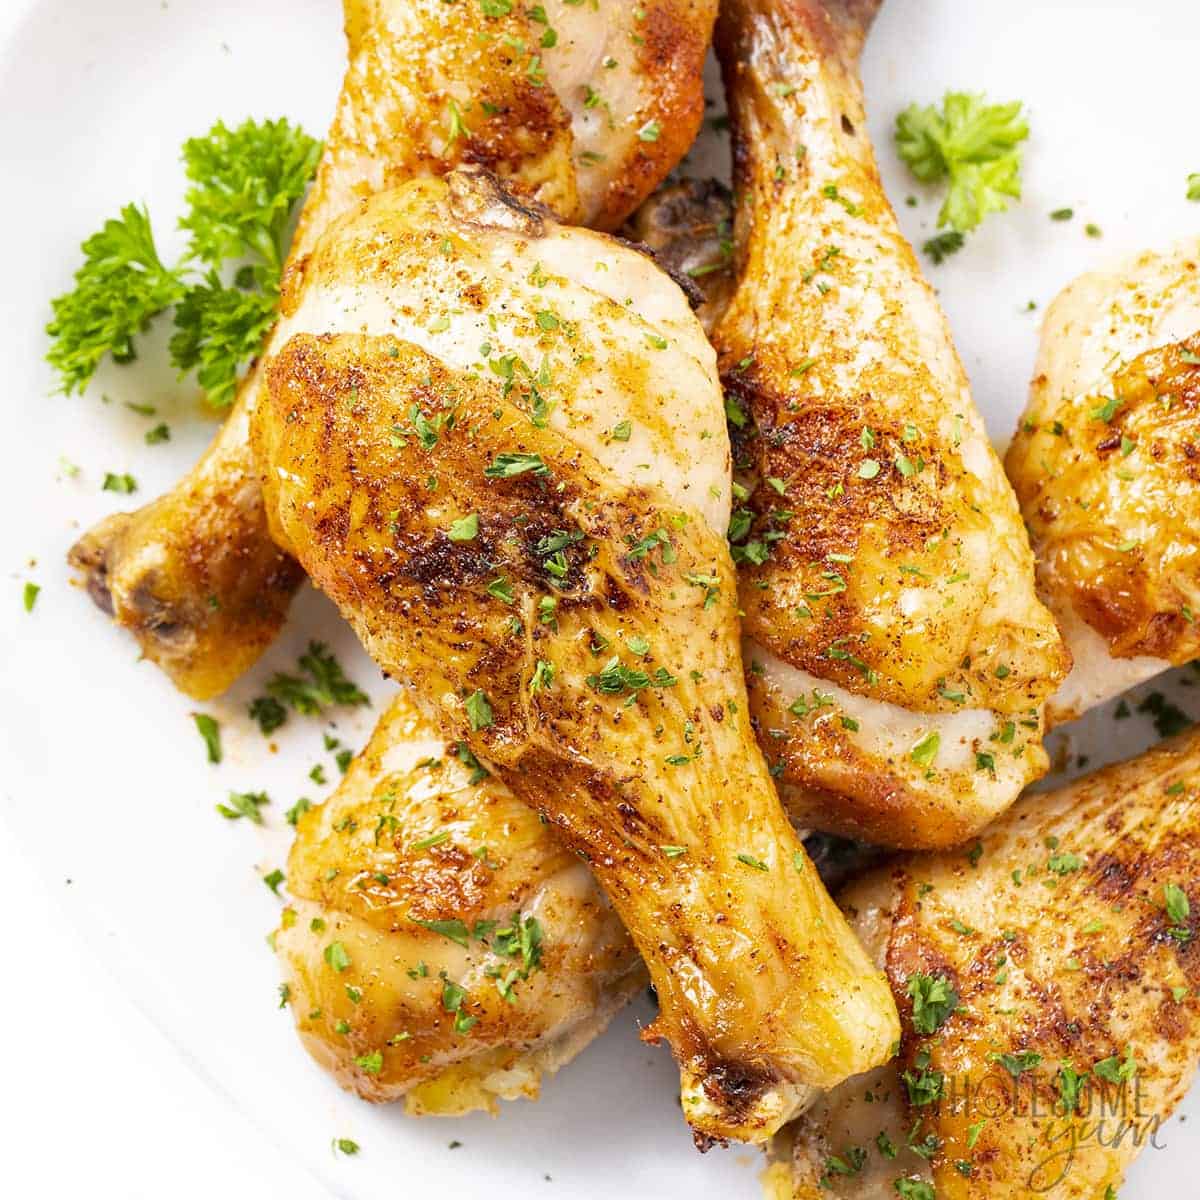 Baked chicken legs on a plate.